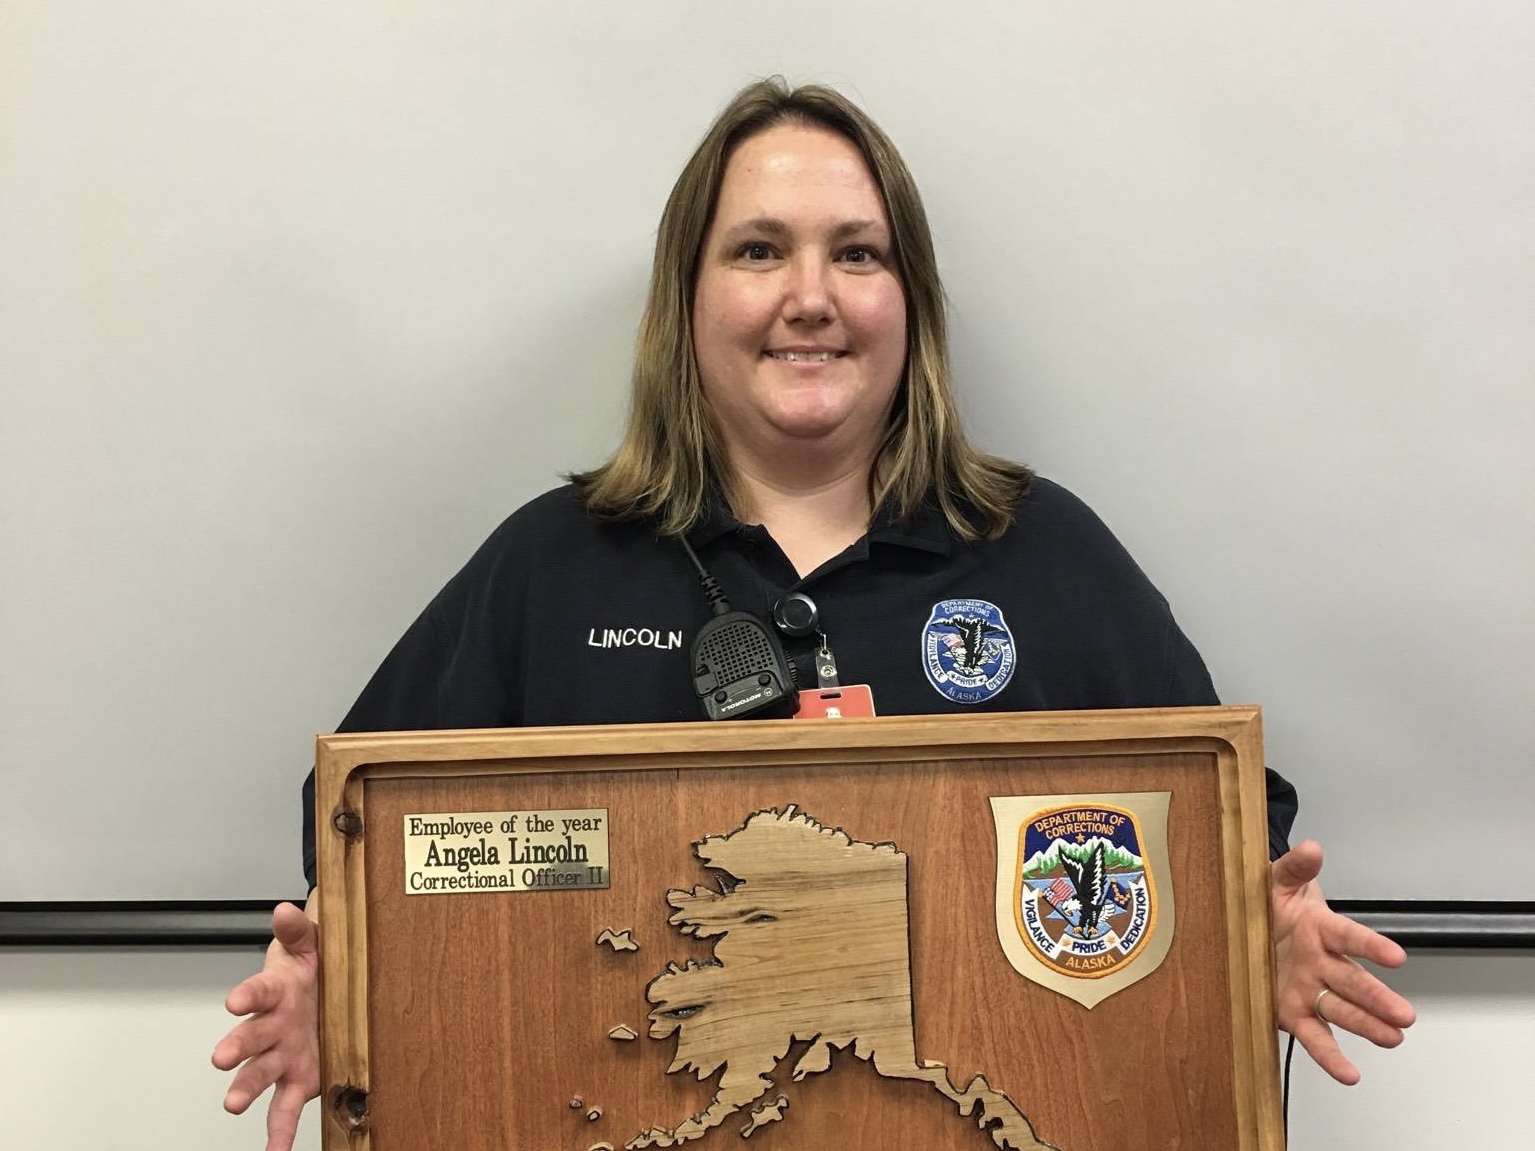 A woman smiles, facing the camera and holding a wooden award that says "employee of the year, Angela Lincoln, correctional officer II" and has the shape of Alaska on it.